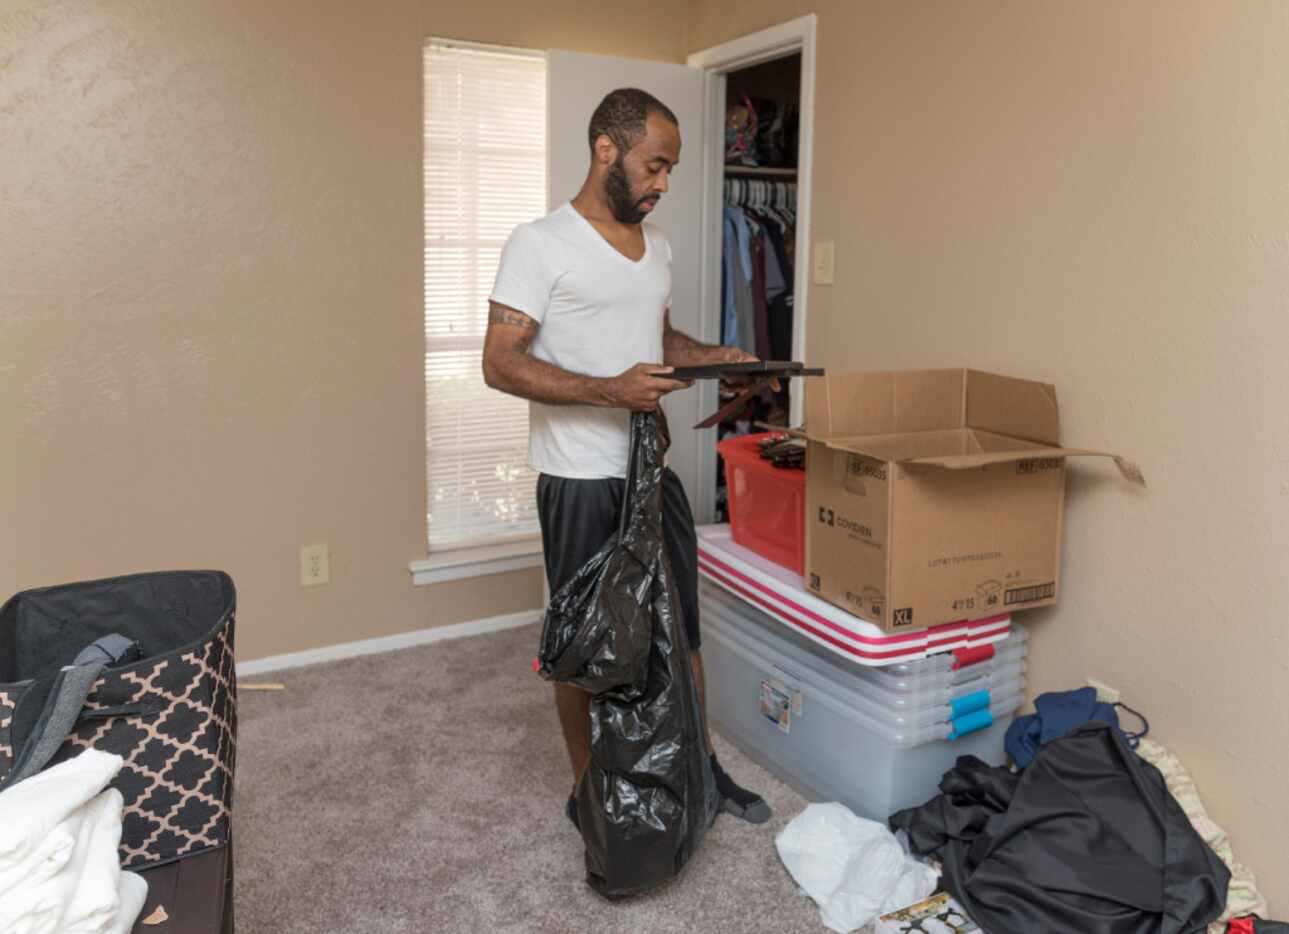 Bobo moved into a two-bedroom apartment in early September that he will pay for without the...